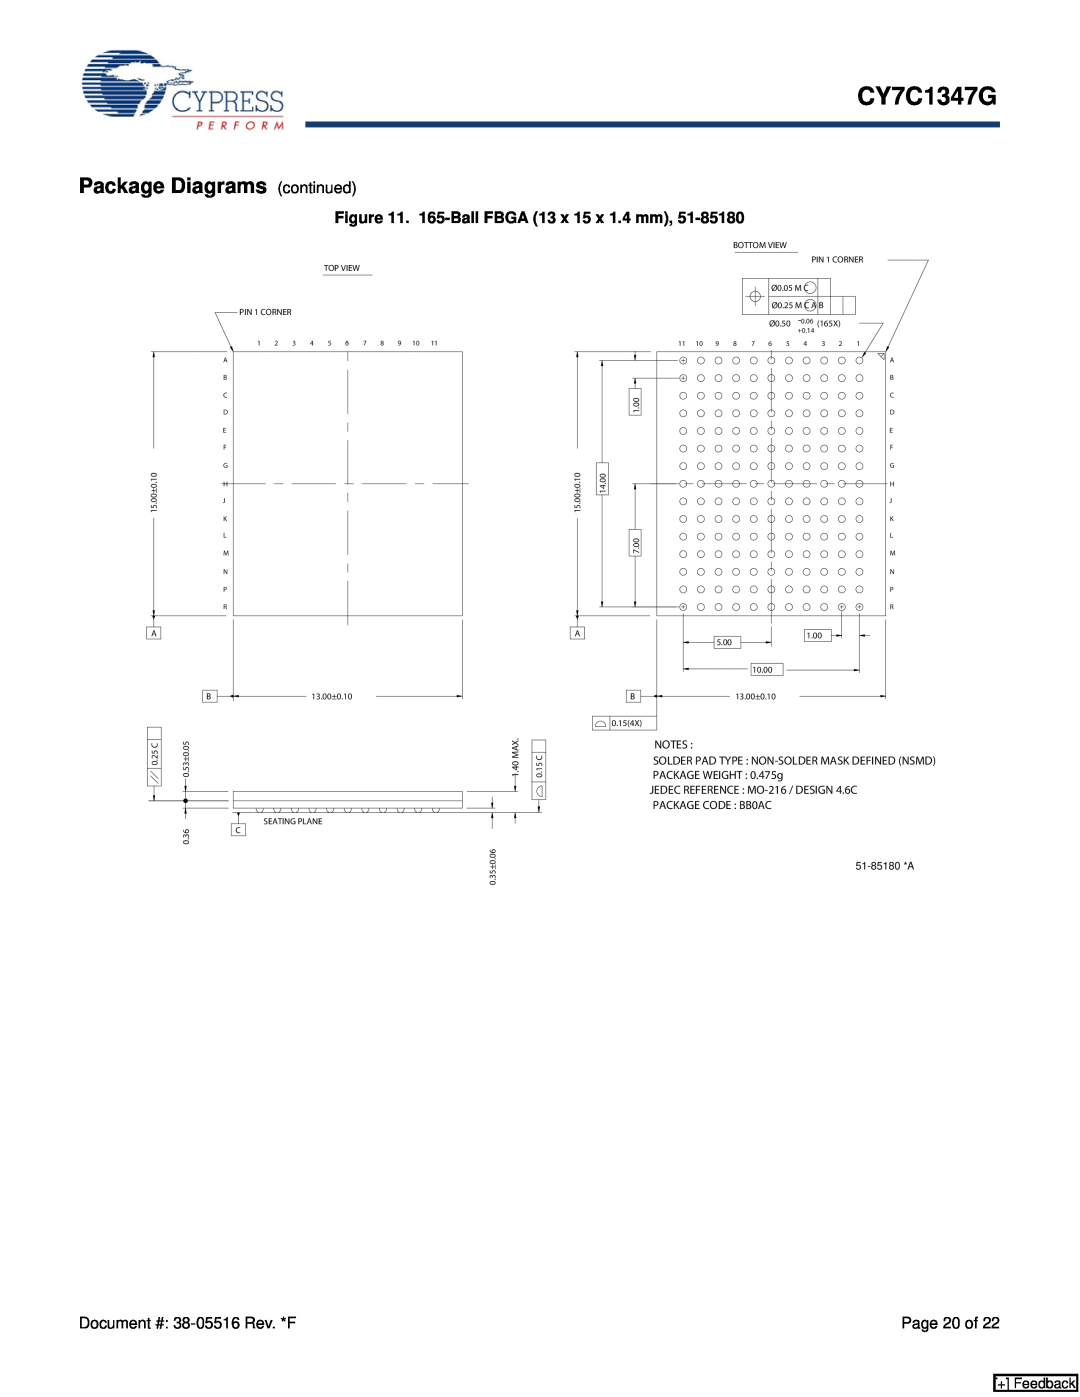 Cypress CY7C1347G manual Package Diagrams continued, 165-Ball FBGA 13 x 15 x 1.4 mm, Page 20 of, + Feedback 